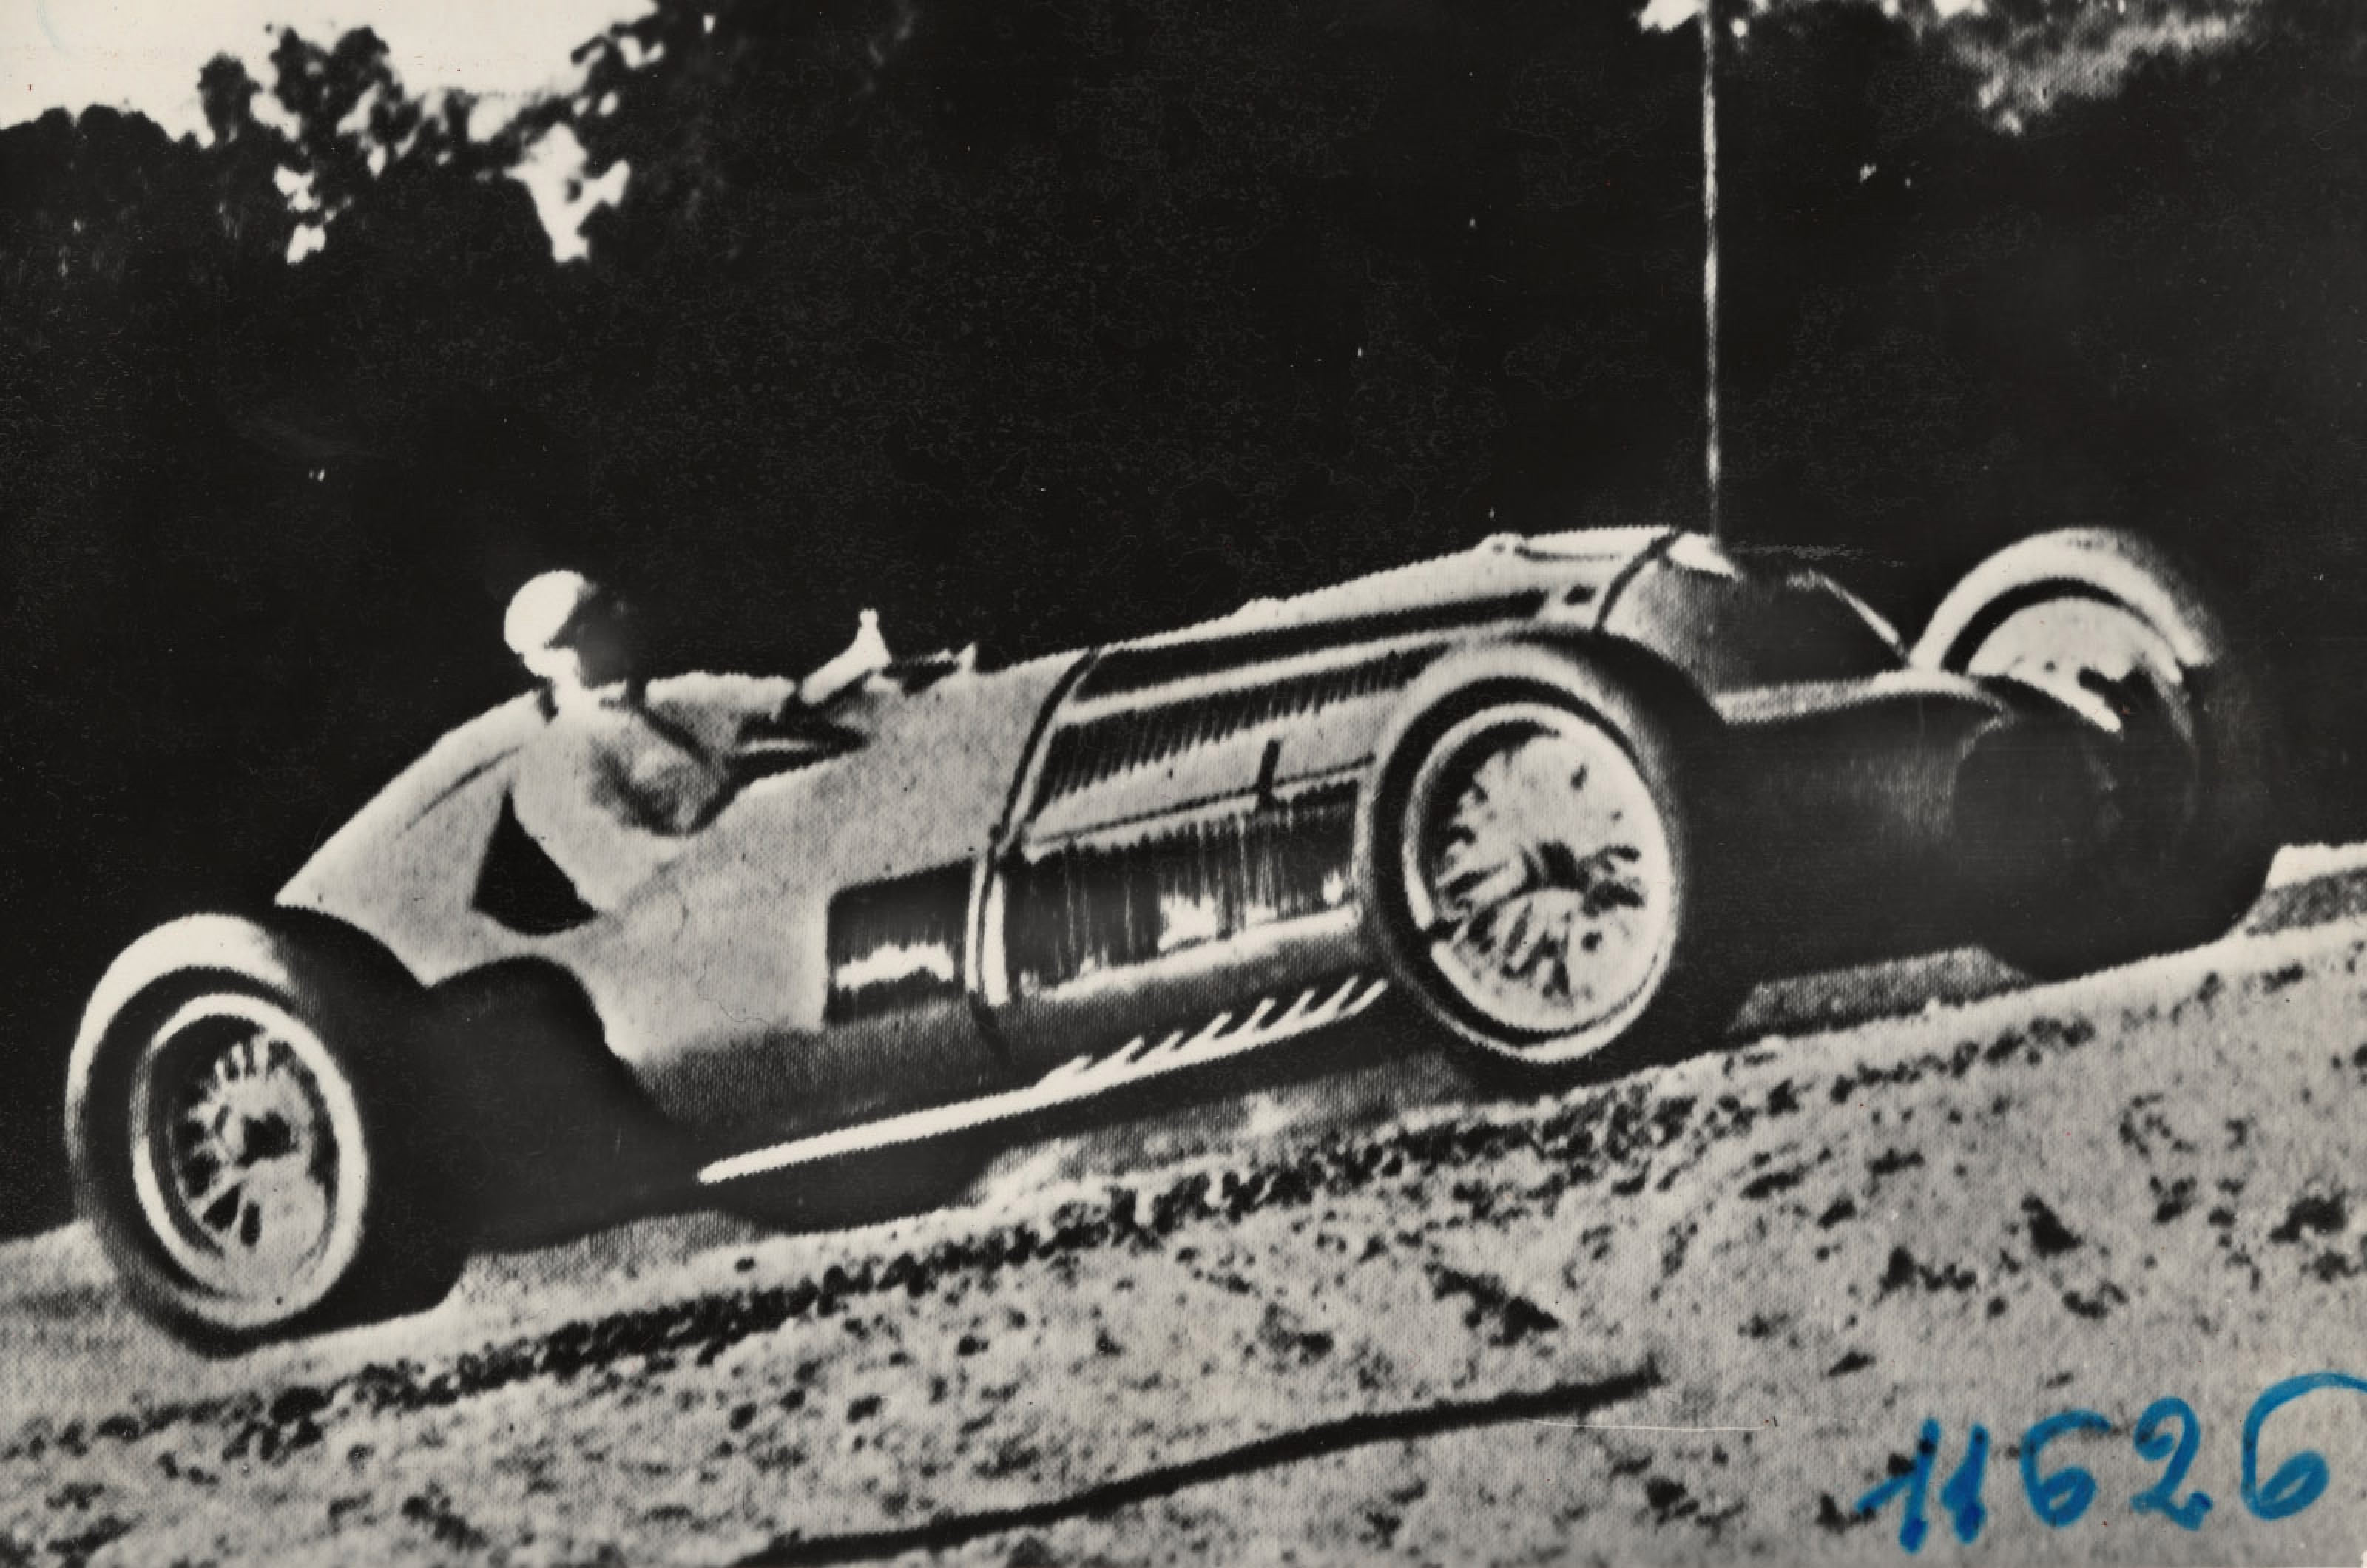 <p>Using its 12C racing car’s platform, Alfa Romeo campaigned the V16 Tipo 316 in the 1938 European Championship. Its best result was a second-place finish in the Grand Prix of Italy.</p>  <p>However, despite its 4.1-litre engine’s 212bhp output (and 7500rpm redline!), as well as its 162mph top speed, it still couldn’t compete with the mighty Auto Union, which had by this time ditched its V16 engine in favour of a supercharged V12.</p>